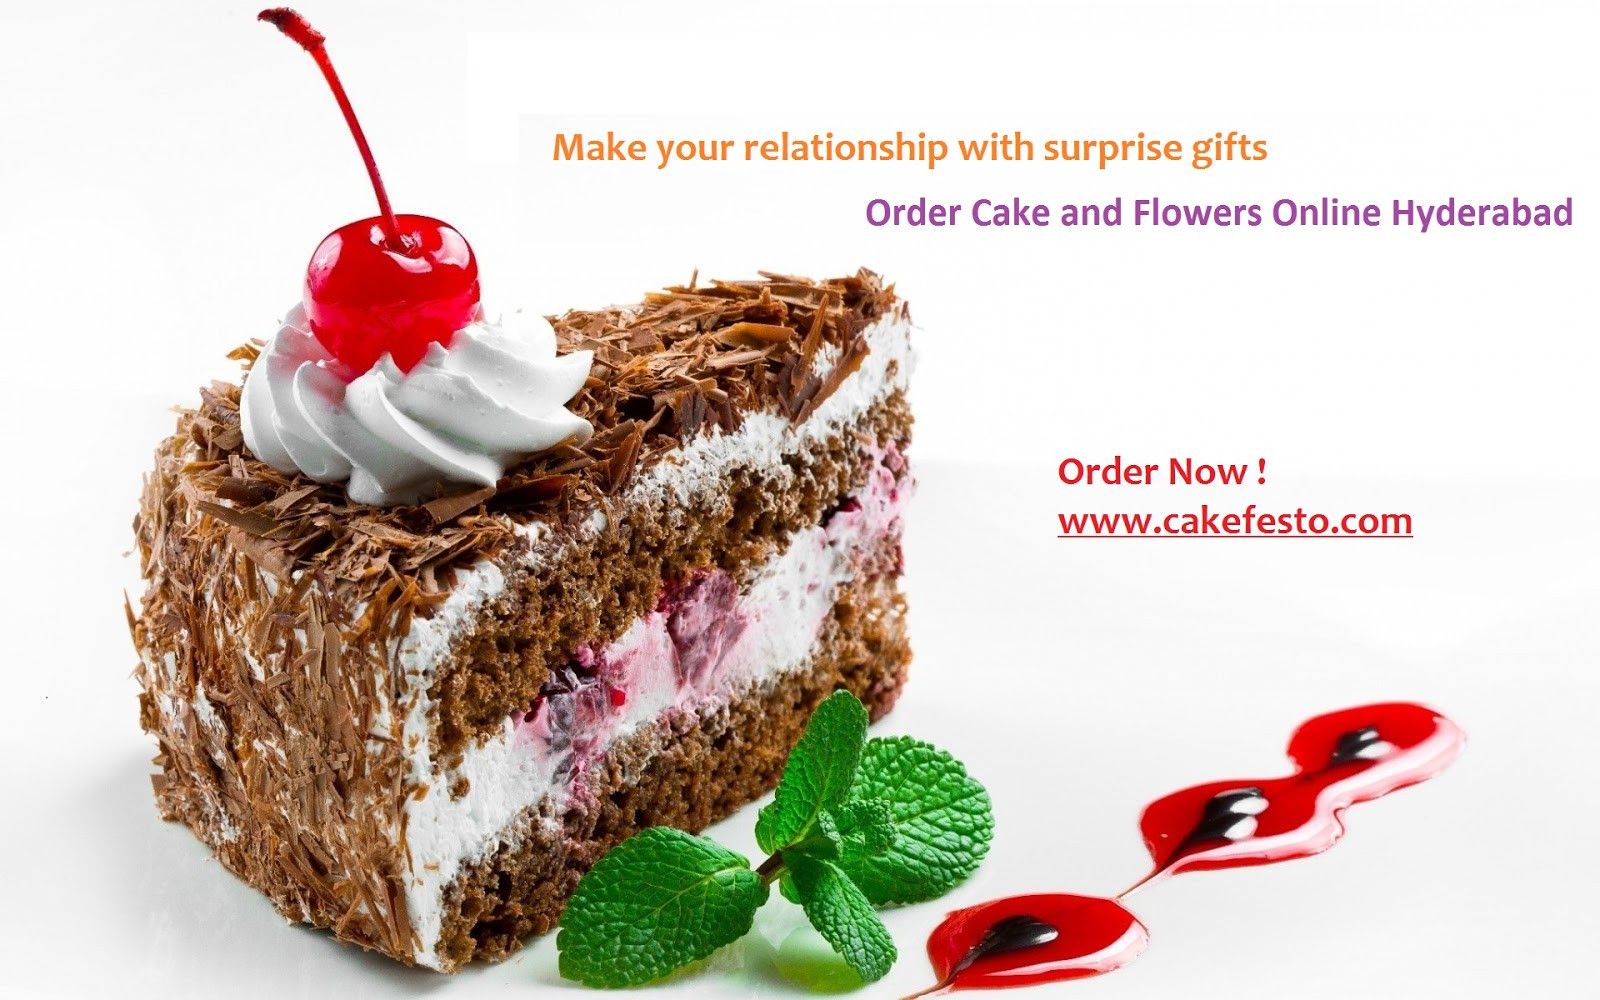 Order Birthday Cakes Online
 Order Cake and Flowers line Hyderabad – Make your